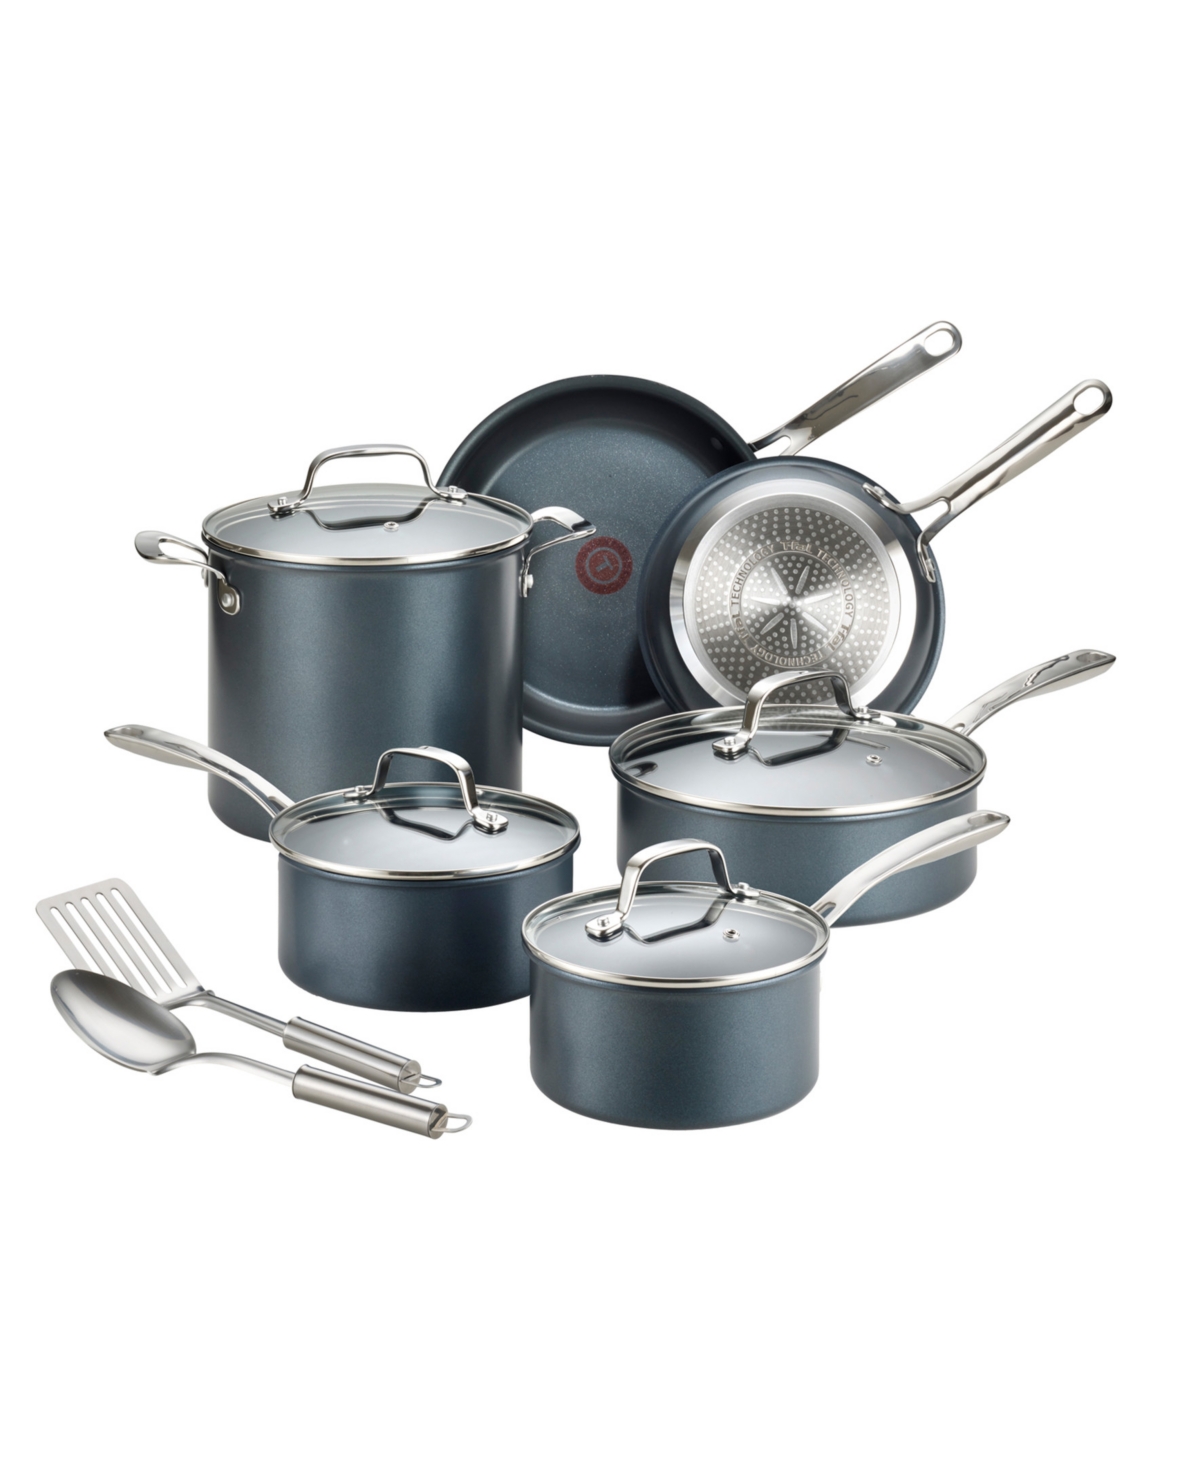 T-fal Platinum Aluminum 12 Piece Nonstick Cookware Set With Induction Base In Gray